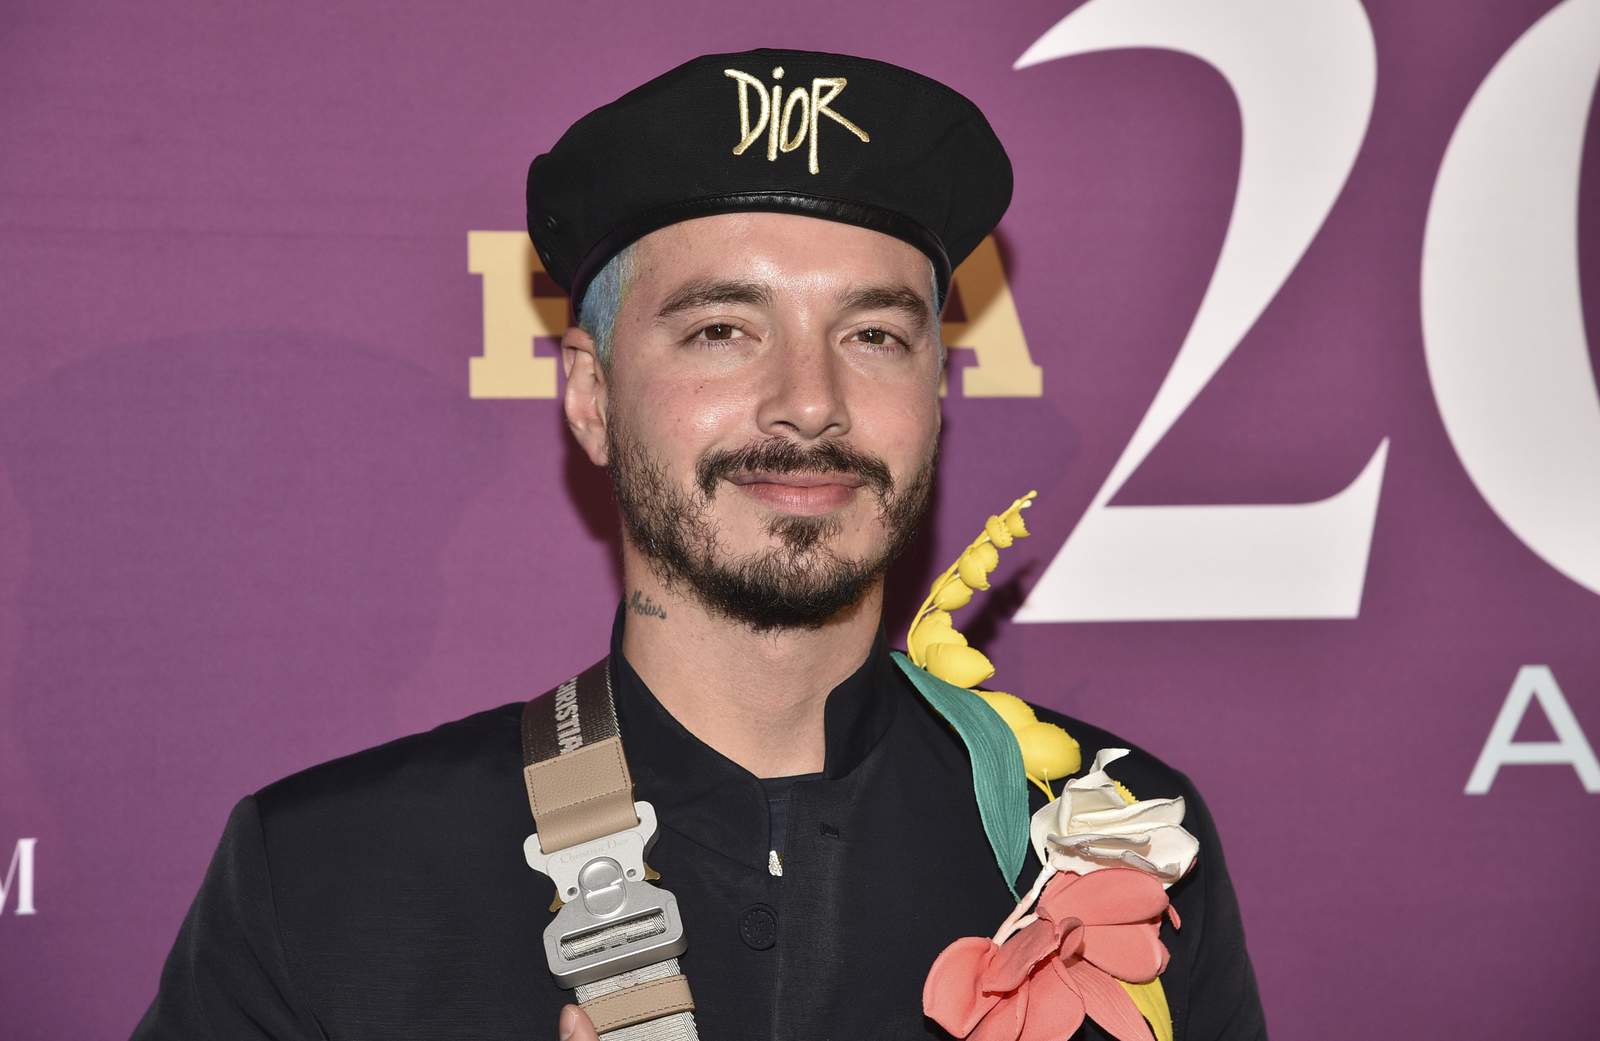 J Balvin says he is recovering from the coronavirus